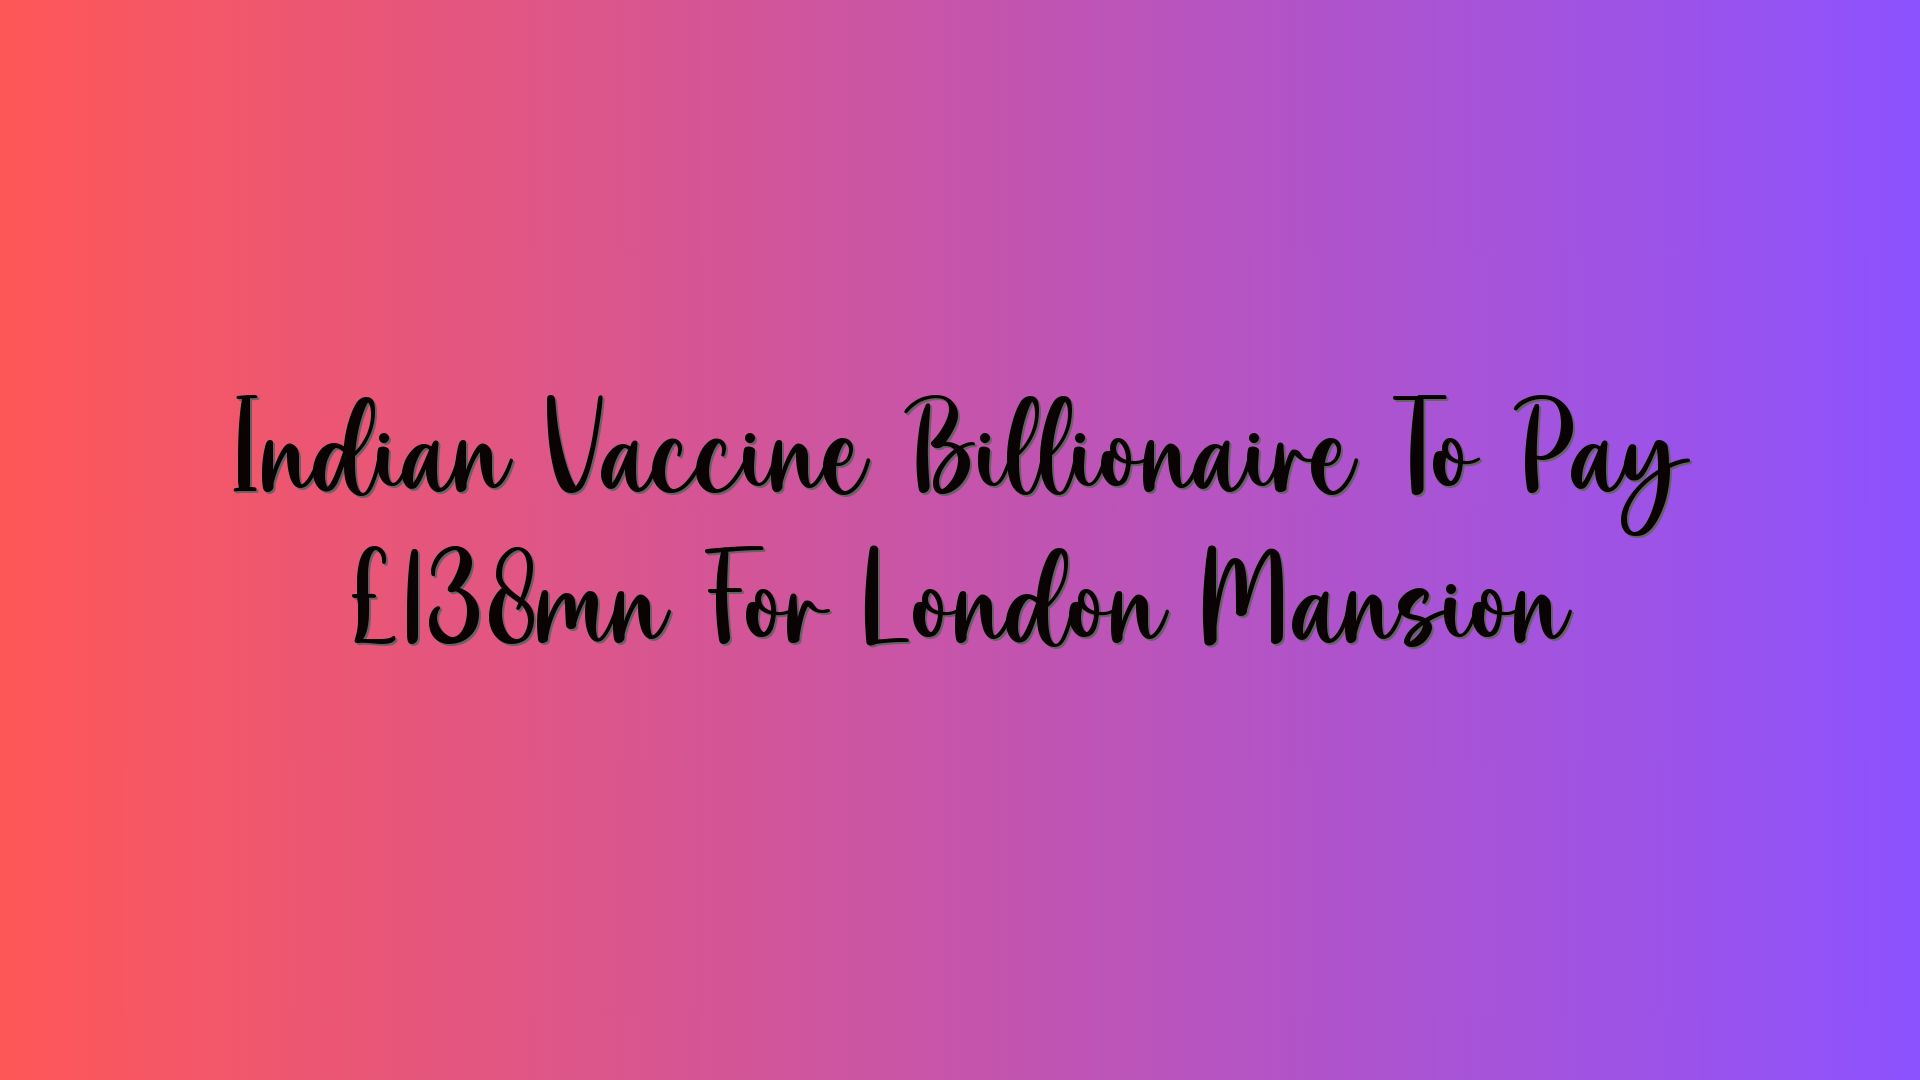 Indian Vaccine Billionaire To Pay £138mn For London Mansion